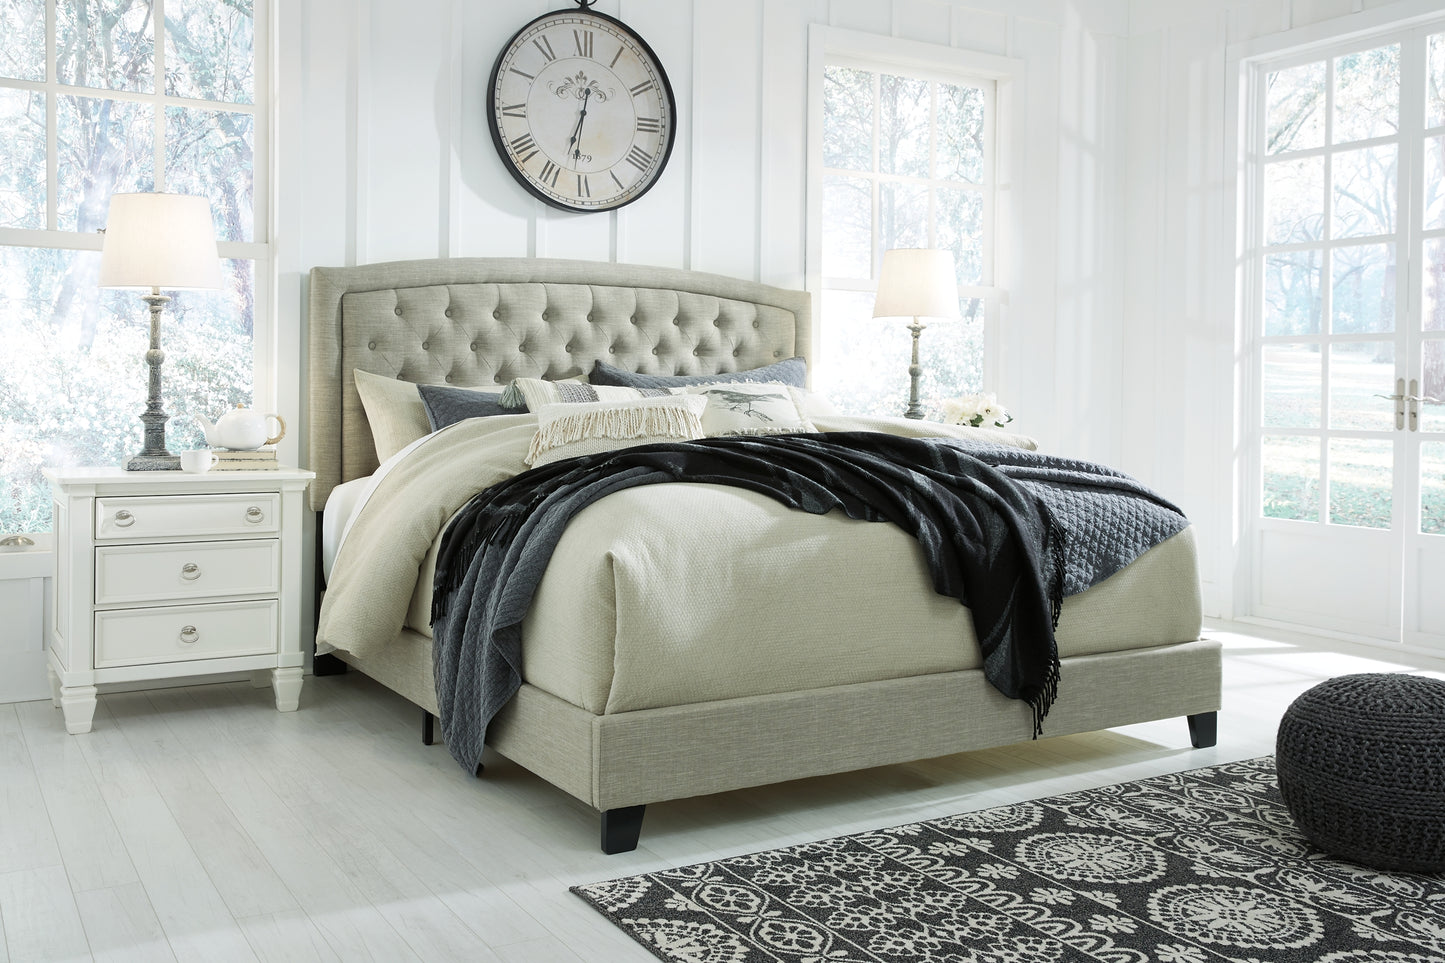 Jerary Queen Upholstered Bed with Mattress JB's Furniture Furniture, Bedroom, Accessories